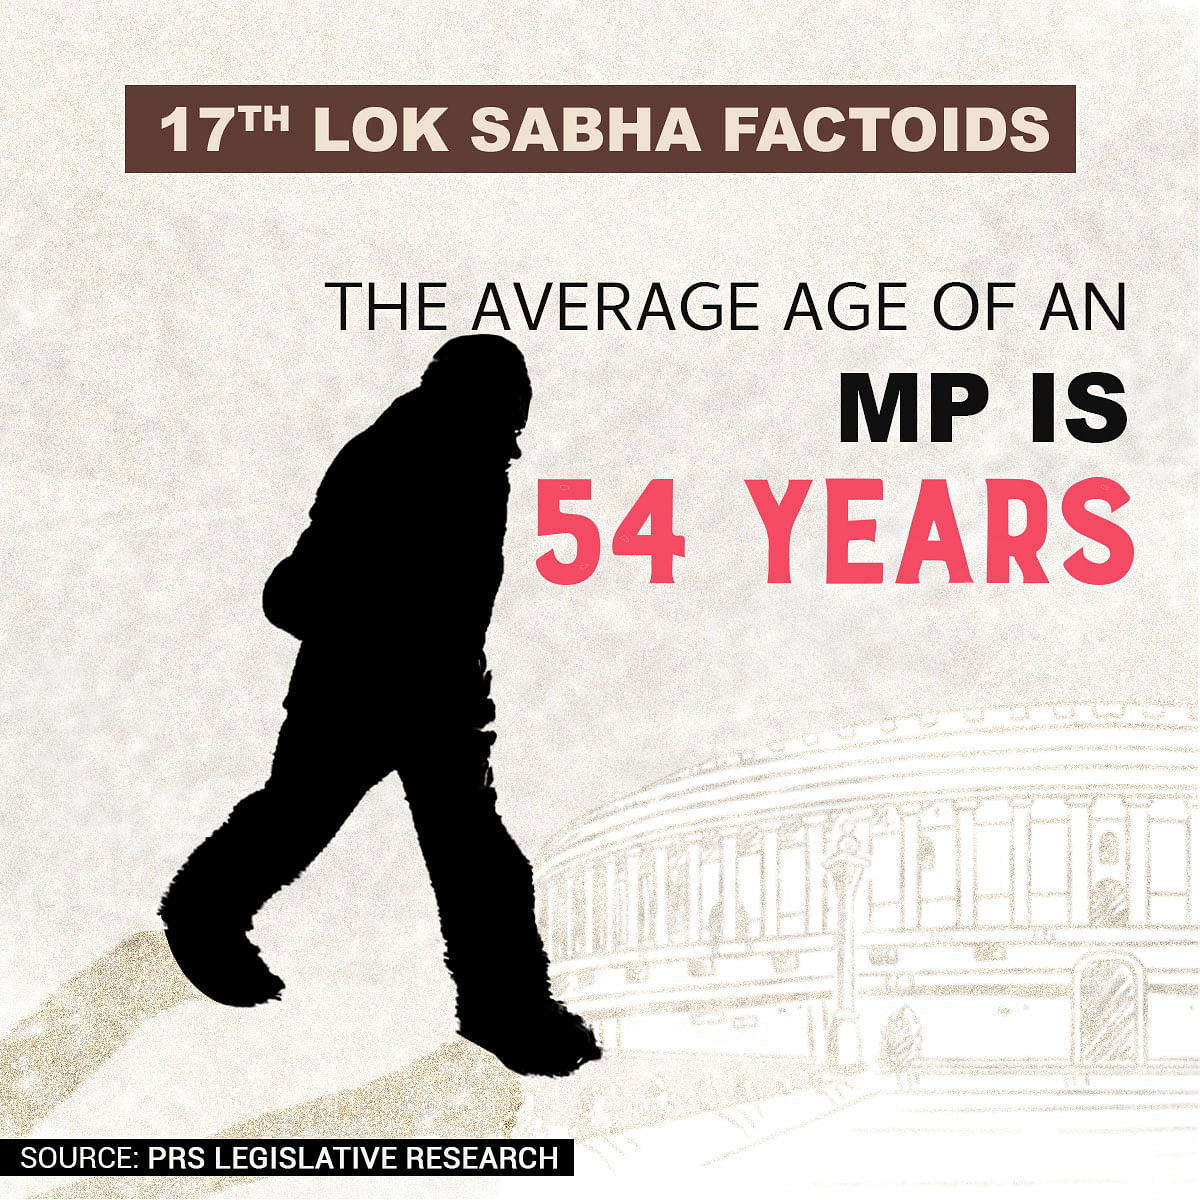 Women MPs in Lok Sabha have shot up from 62 to 78.